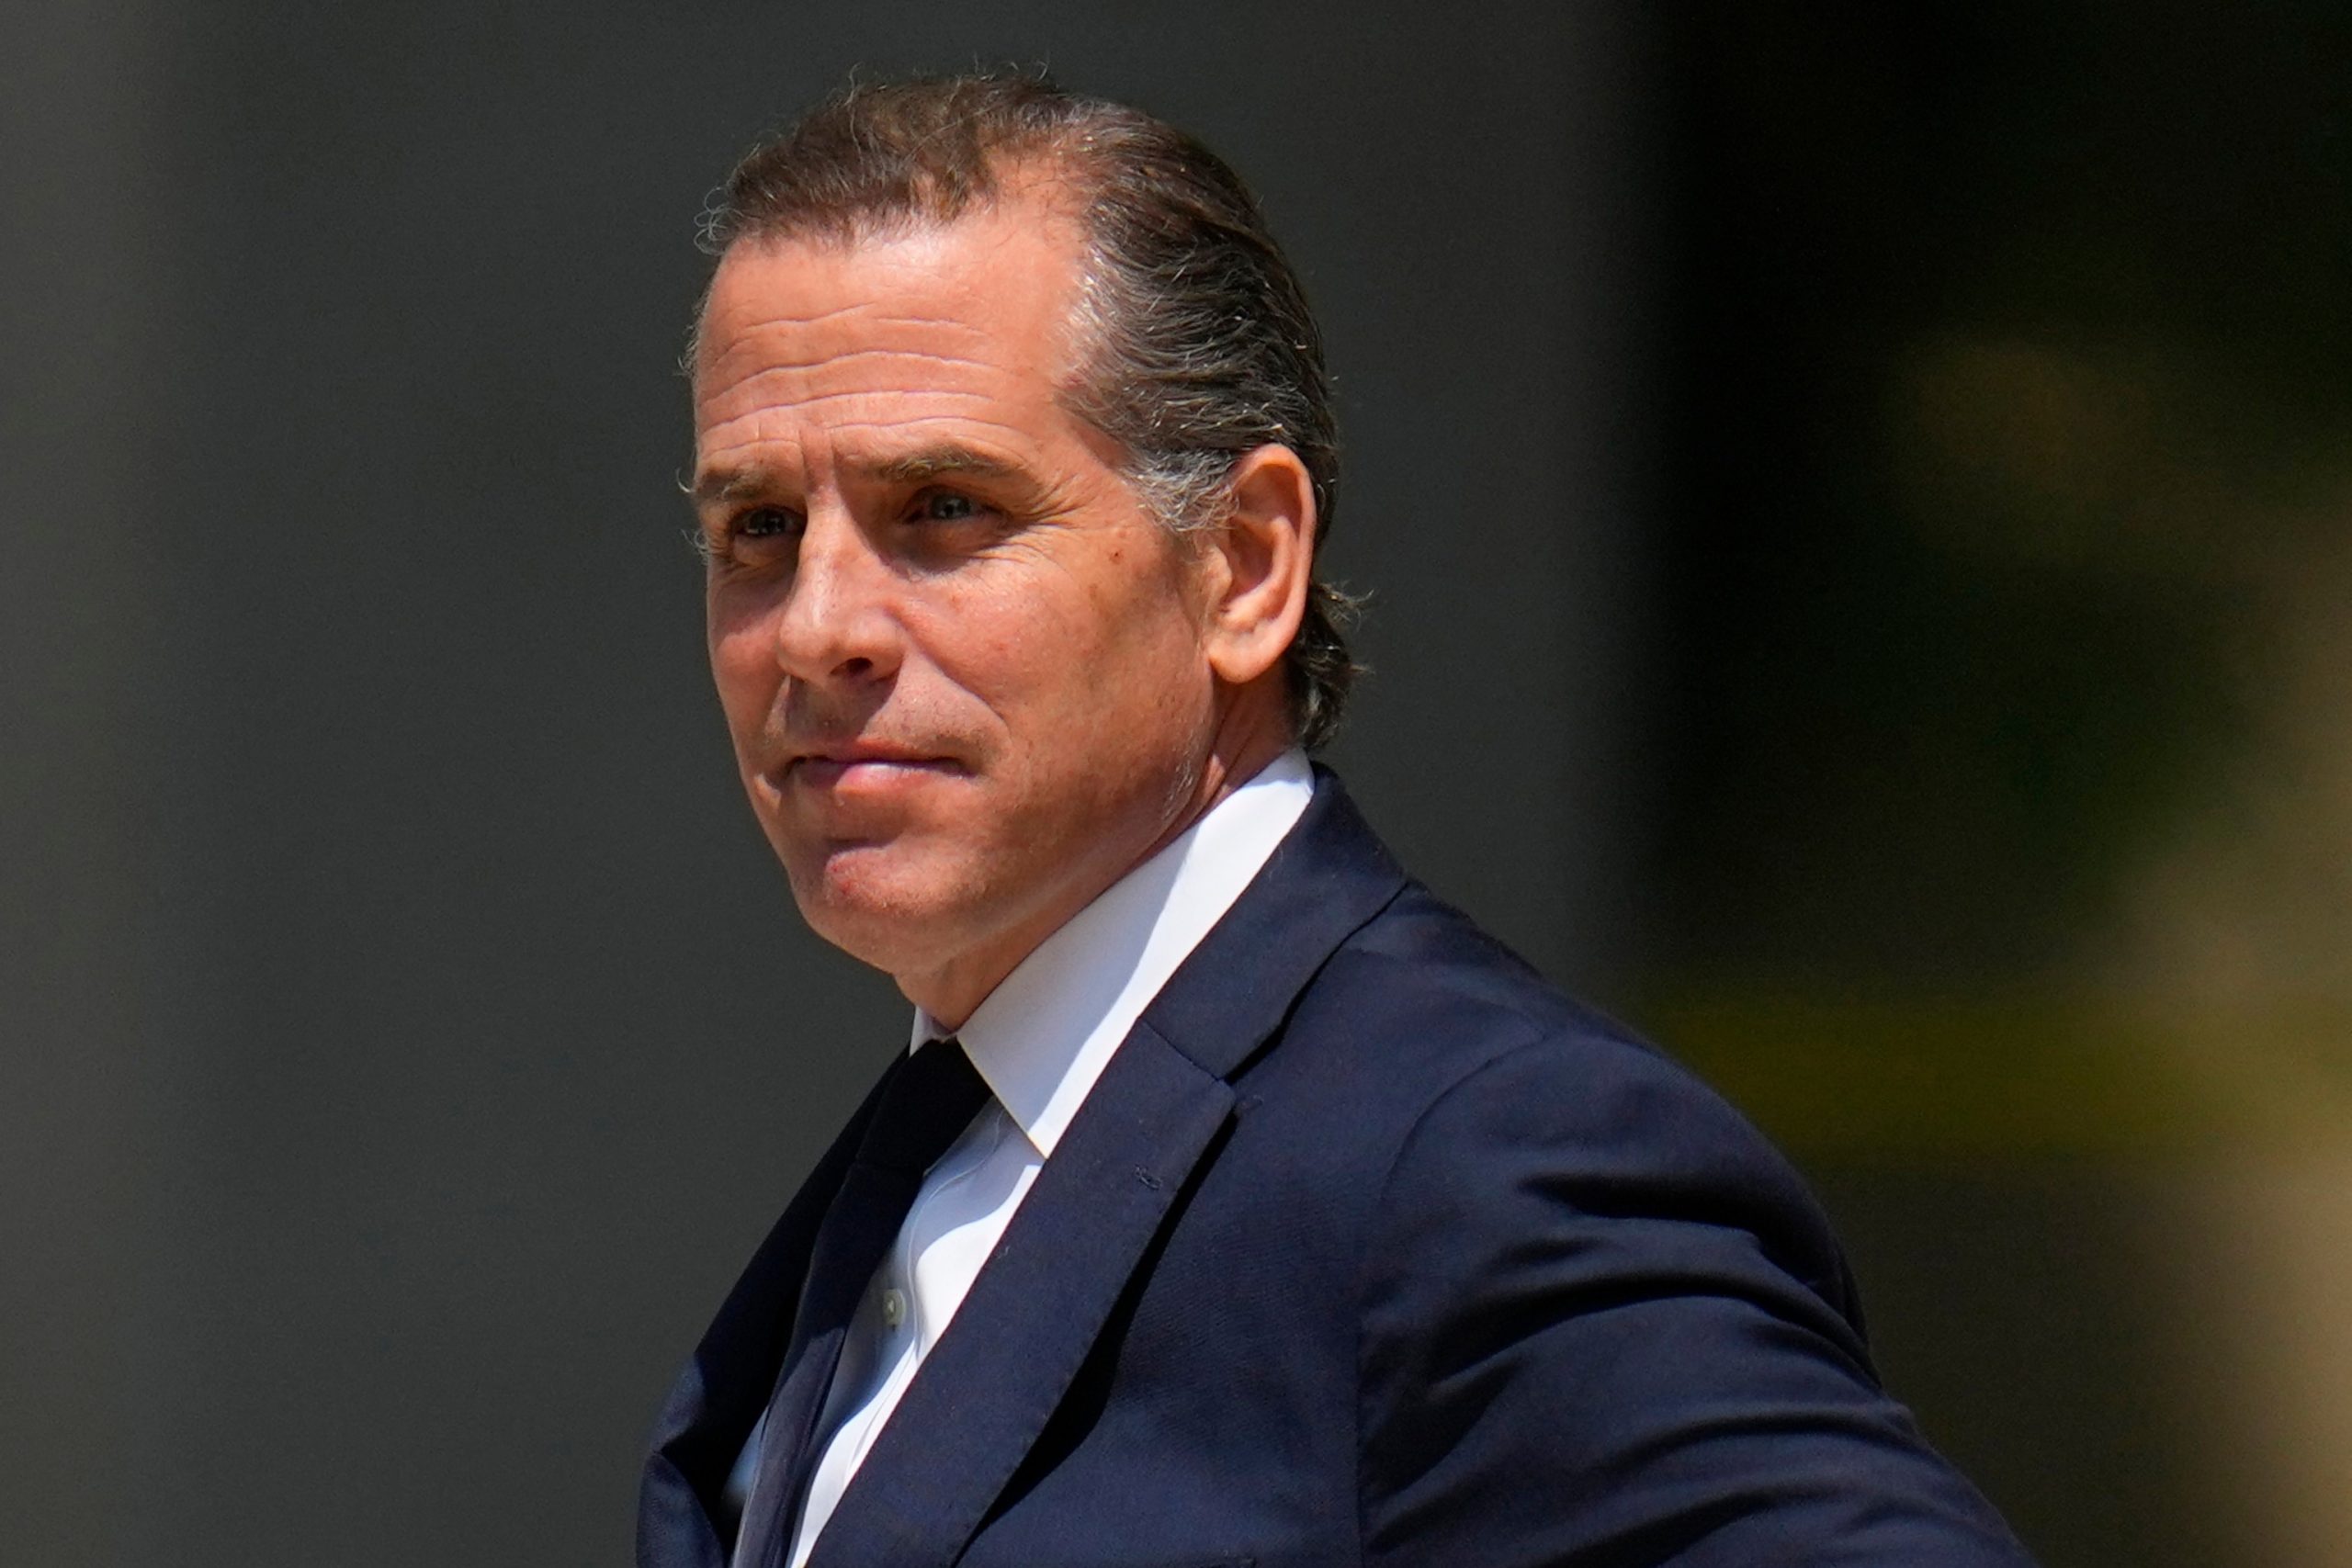 Hunter Biden Ordered to Attend In-Person Arraignment for Federal Gun Charges by Judge